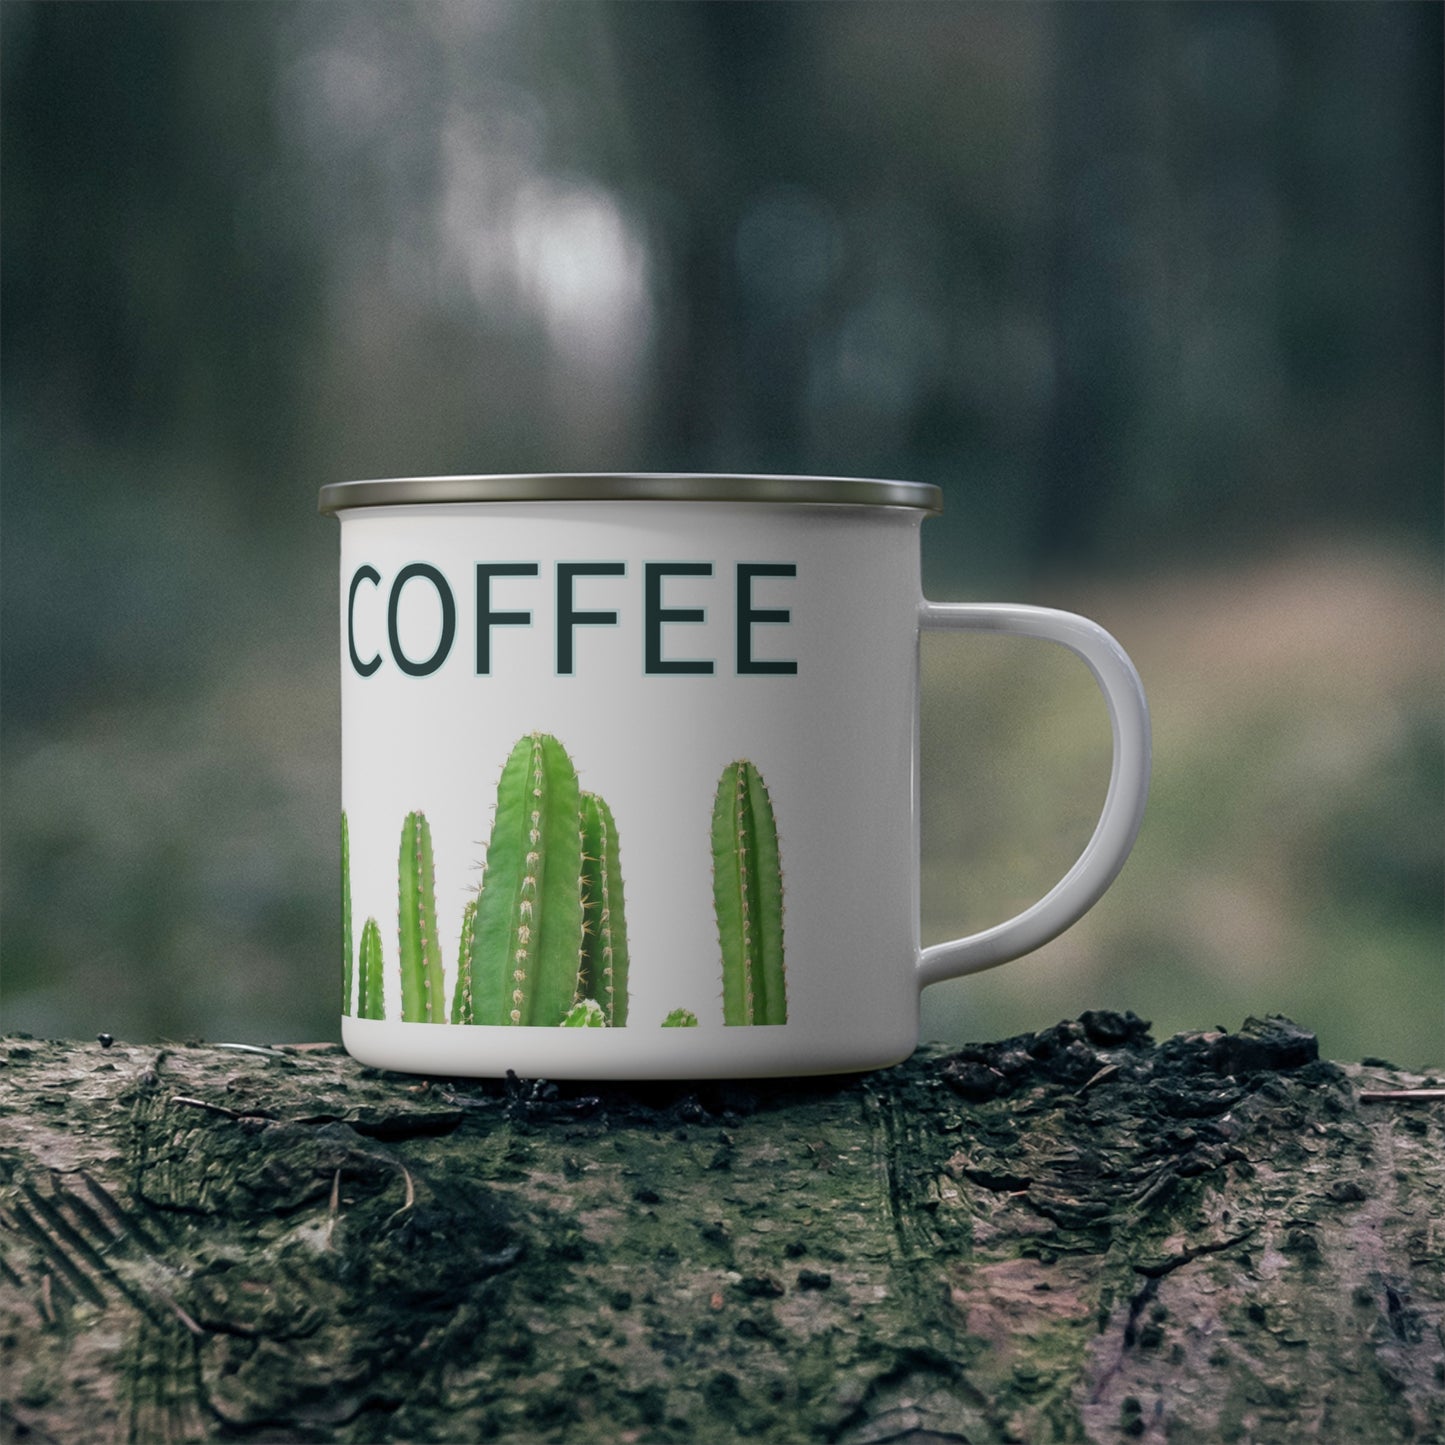 Cacti & Coffee Enameled Coffee Cup, Great Gift For Cacti & Coffee Lovers